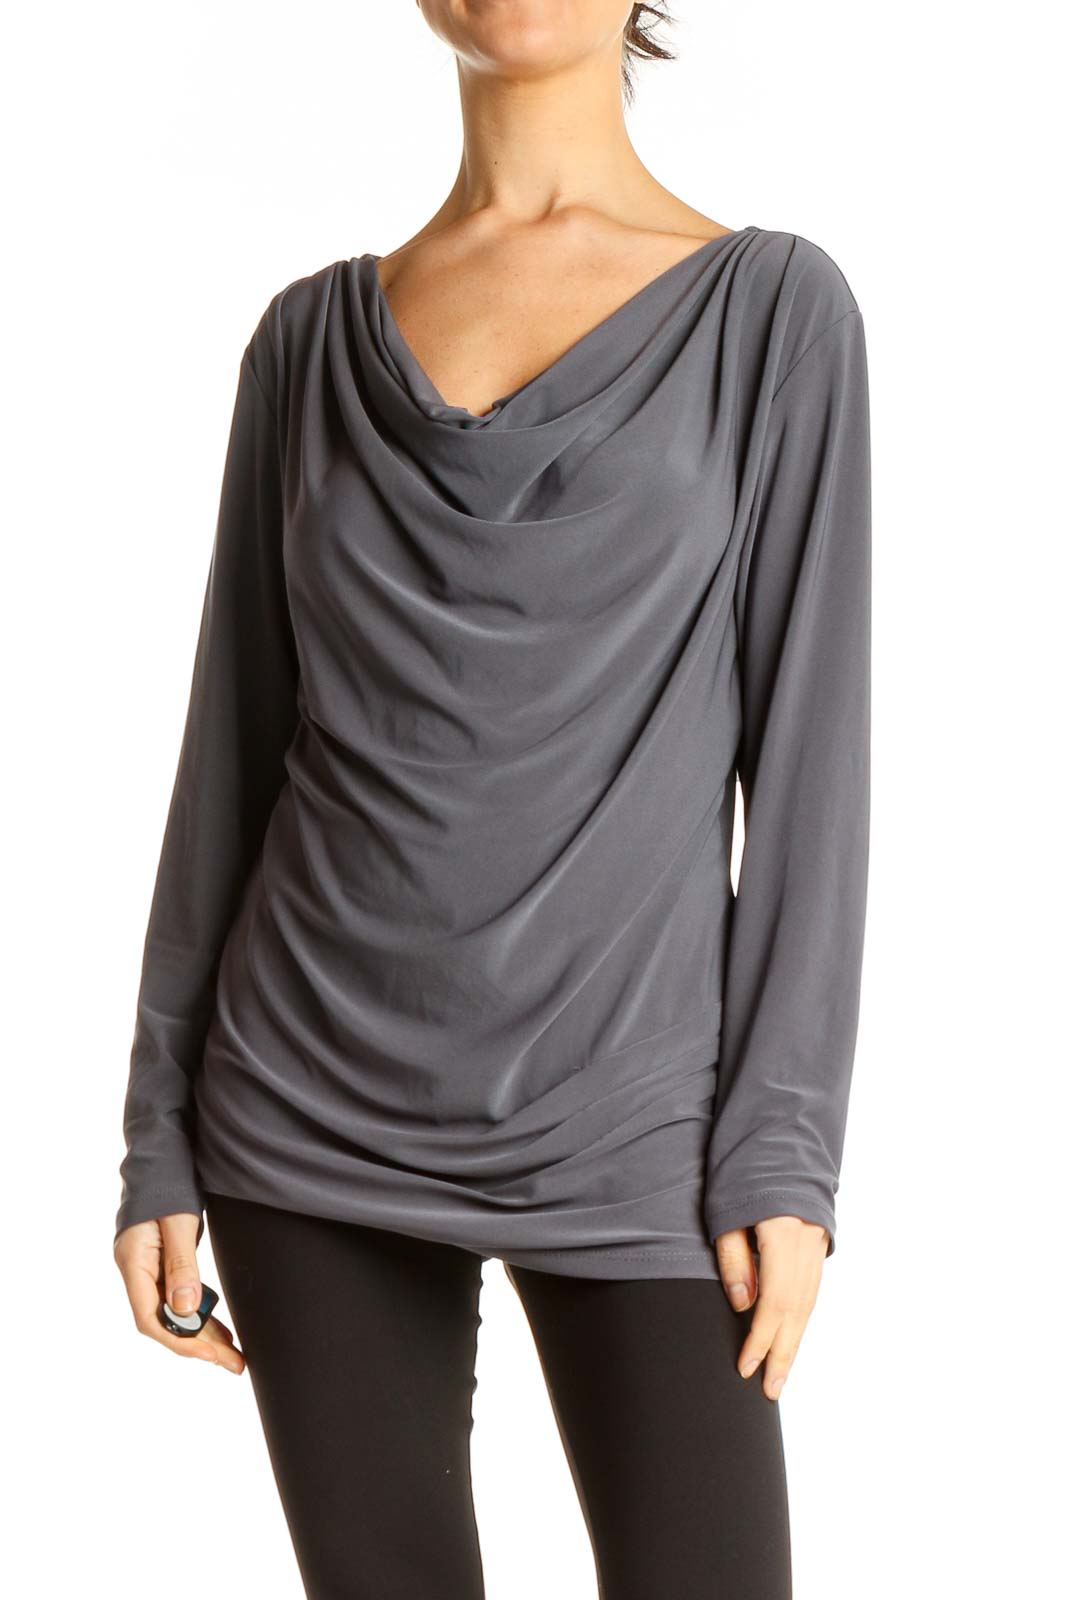 Gray Chic Top Front